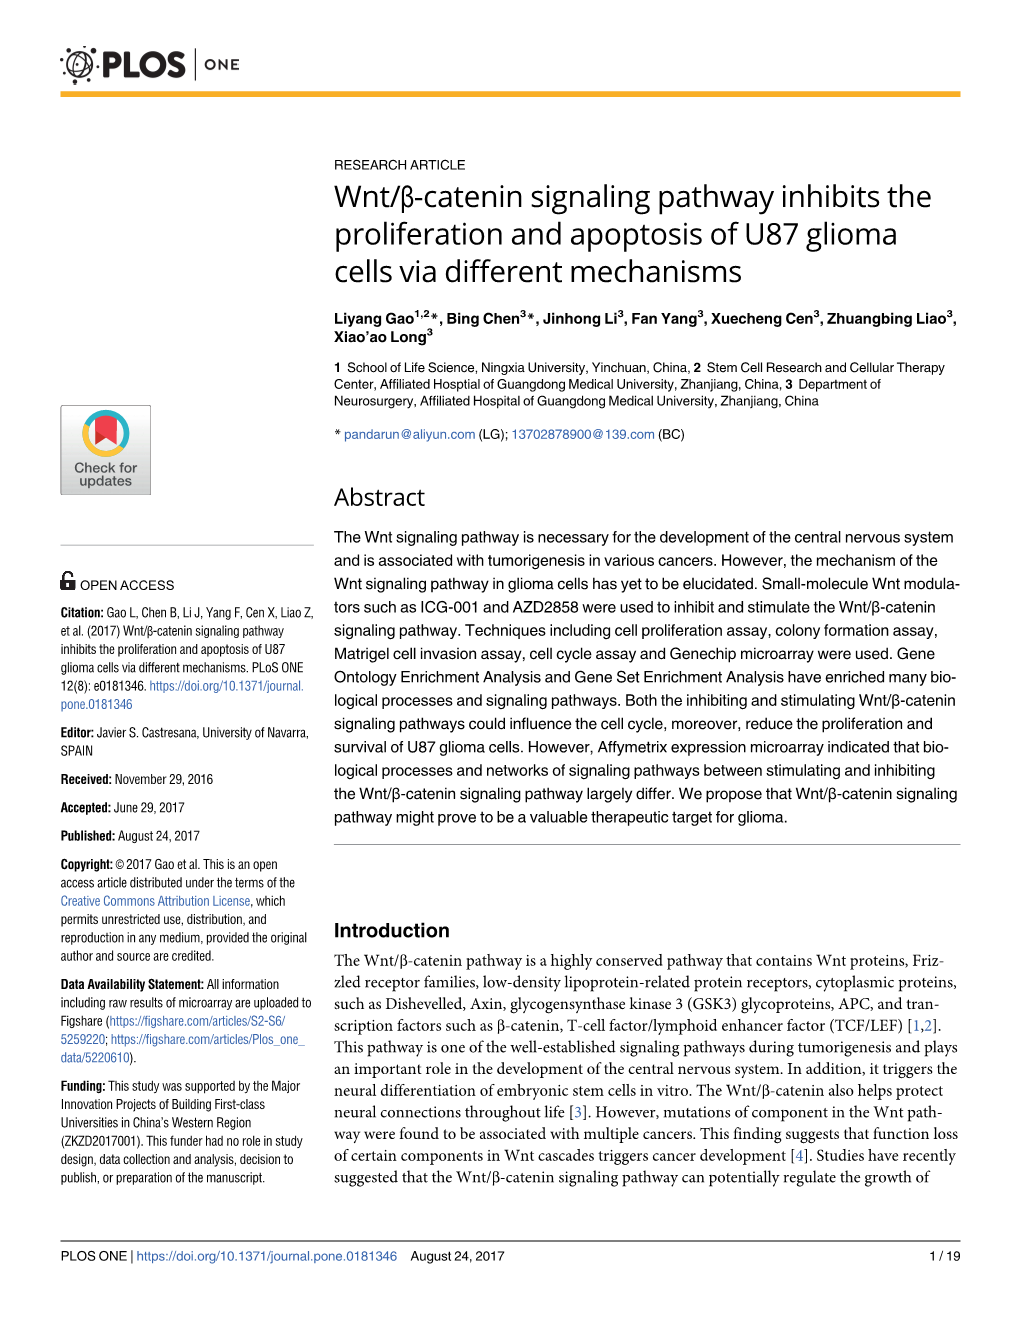 Wnt/Β-Catenin Signaling Pathway Inhibits the Proliferation and Apoptosis of U87 Glioma Cells Via Different Mechanisms